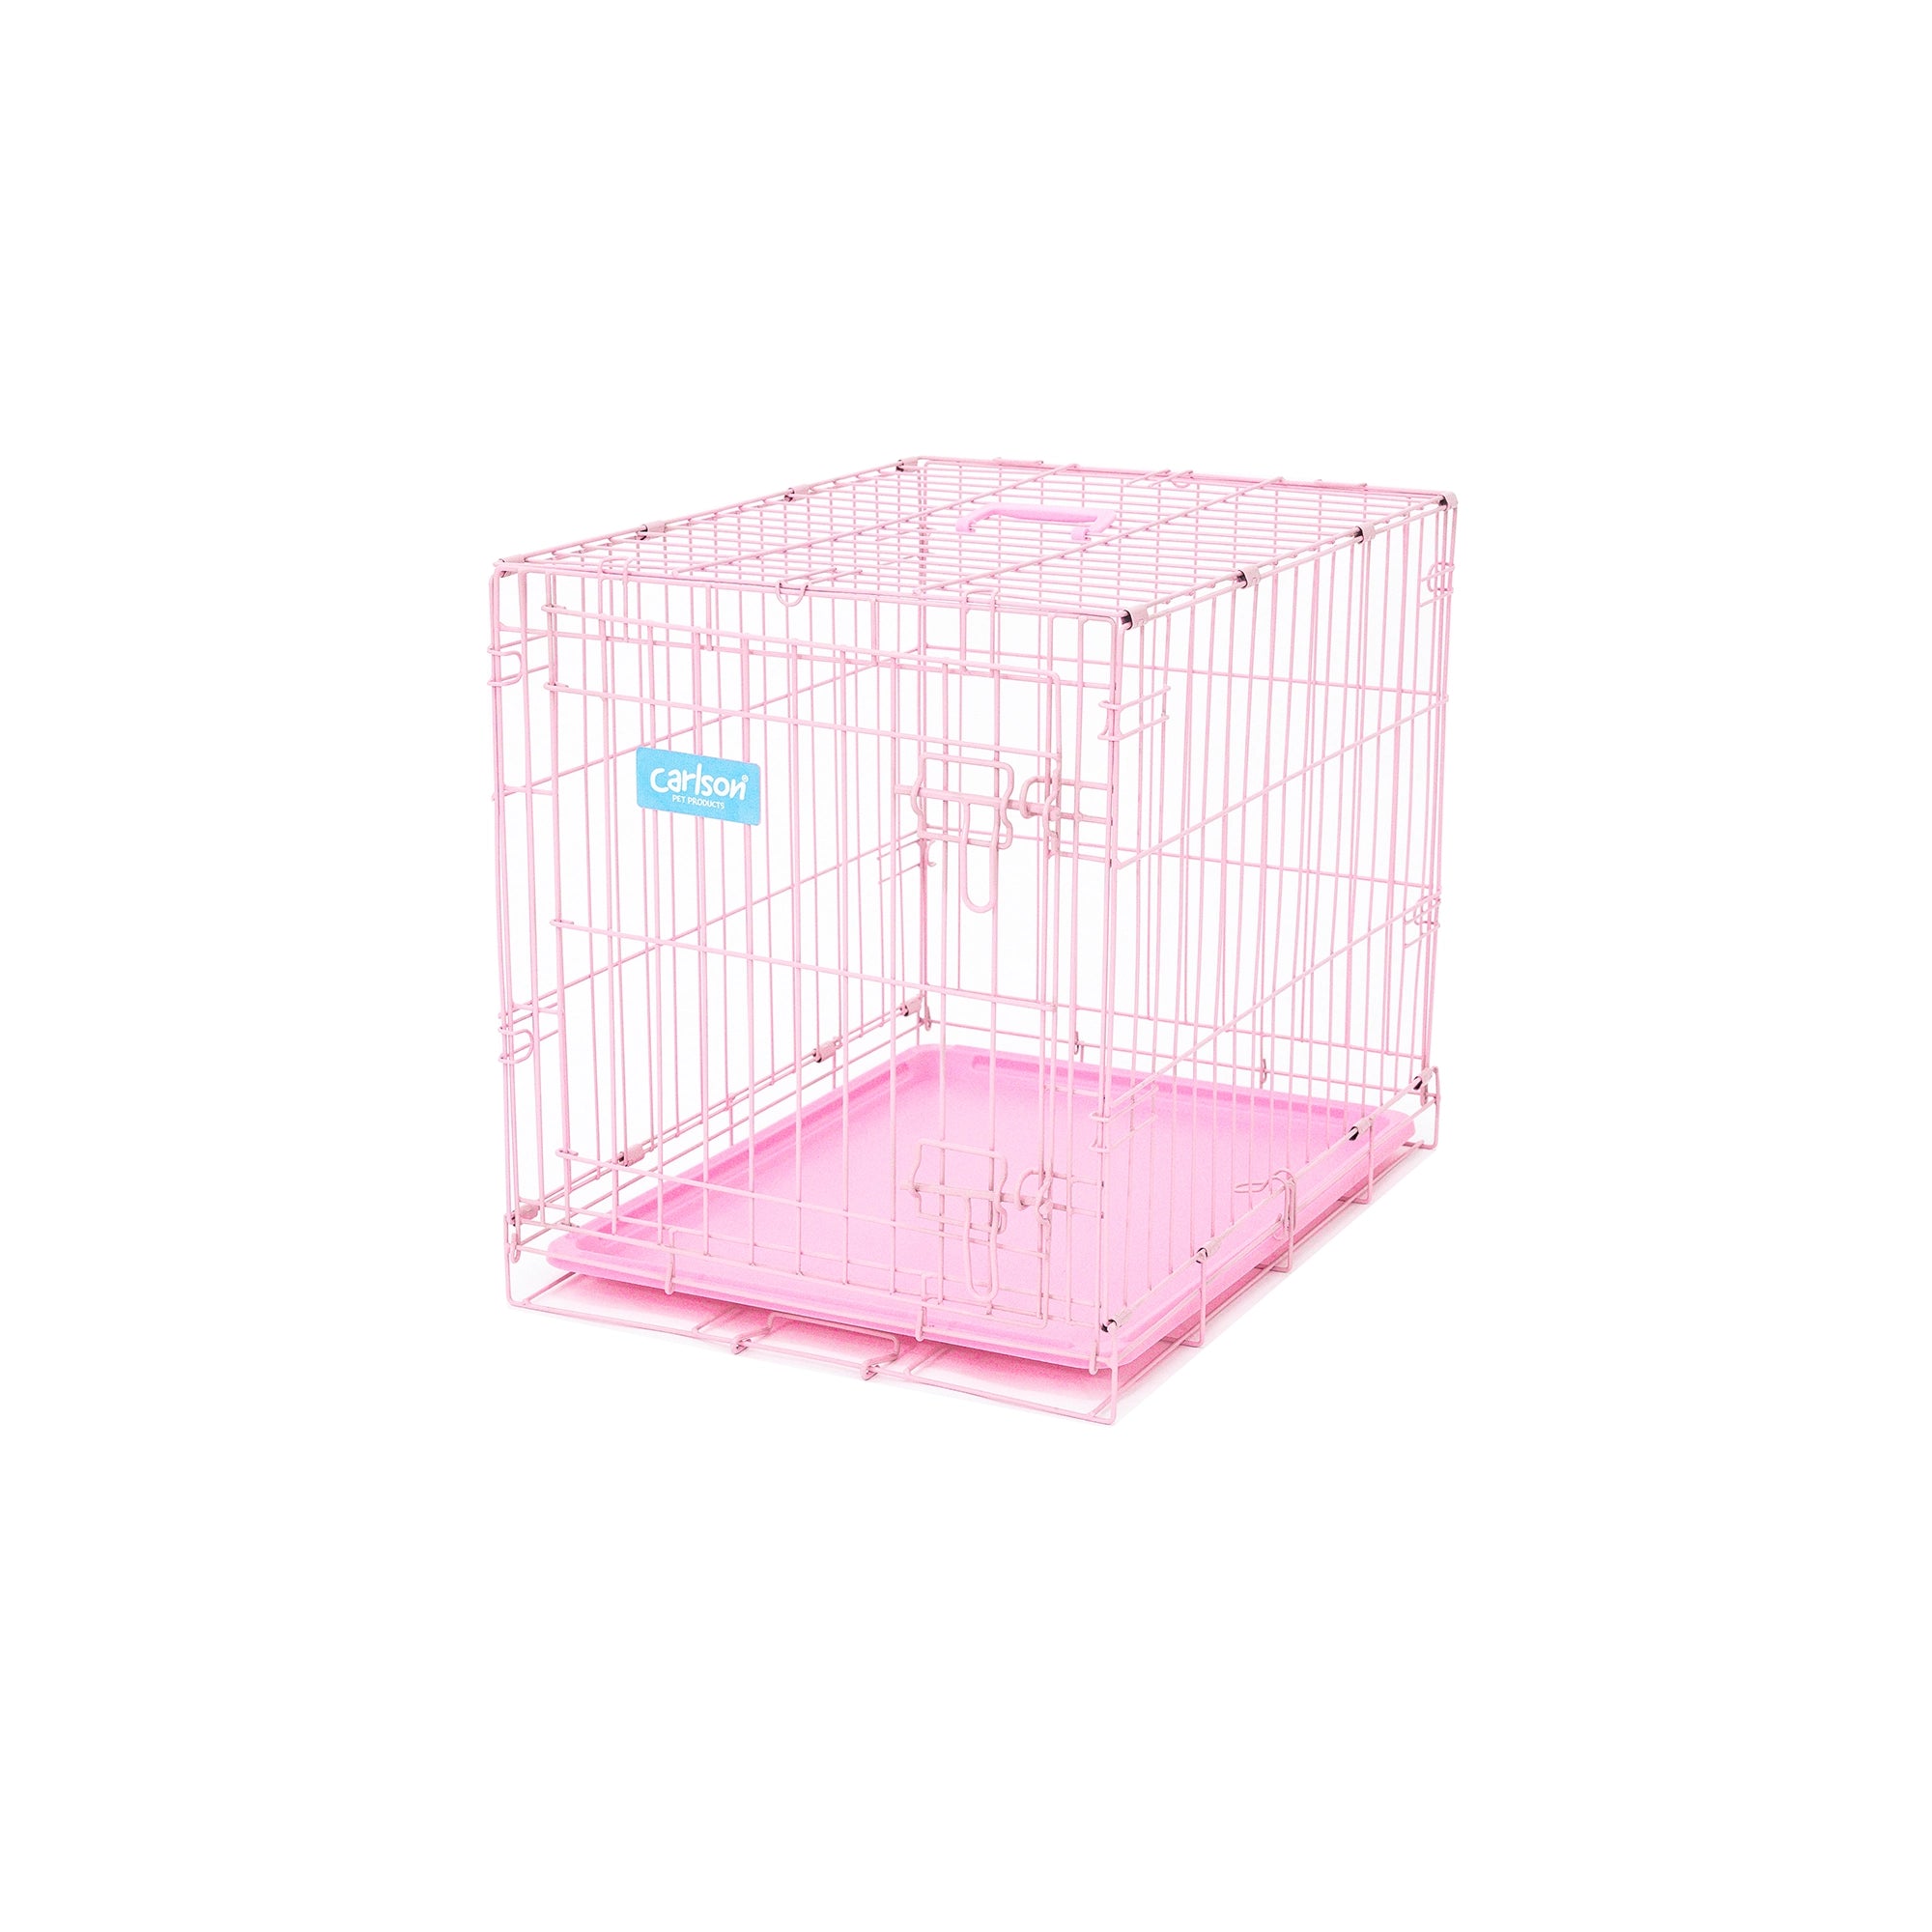 Small Single-Door Dog Crate on White Background.